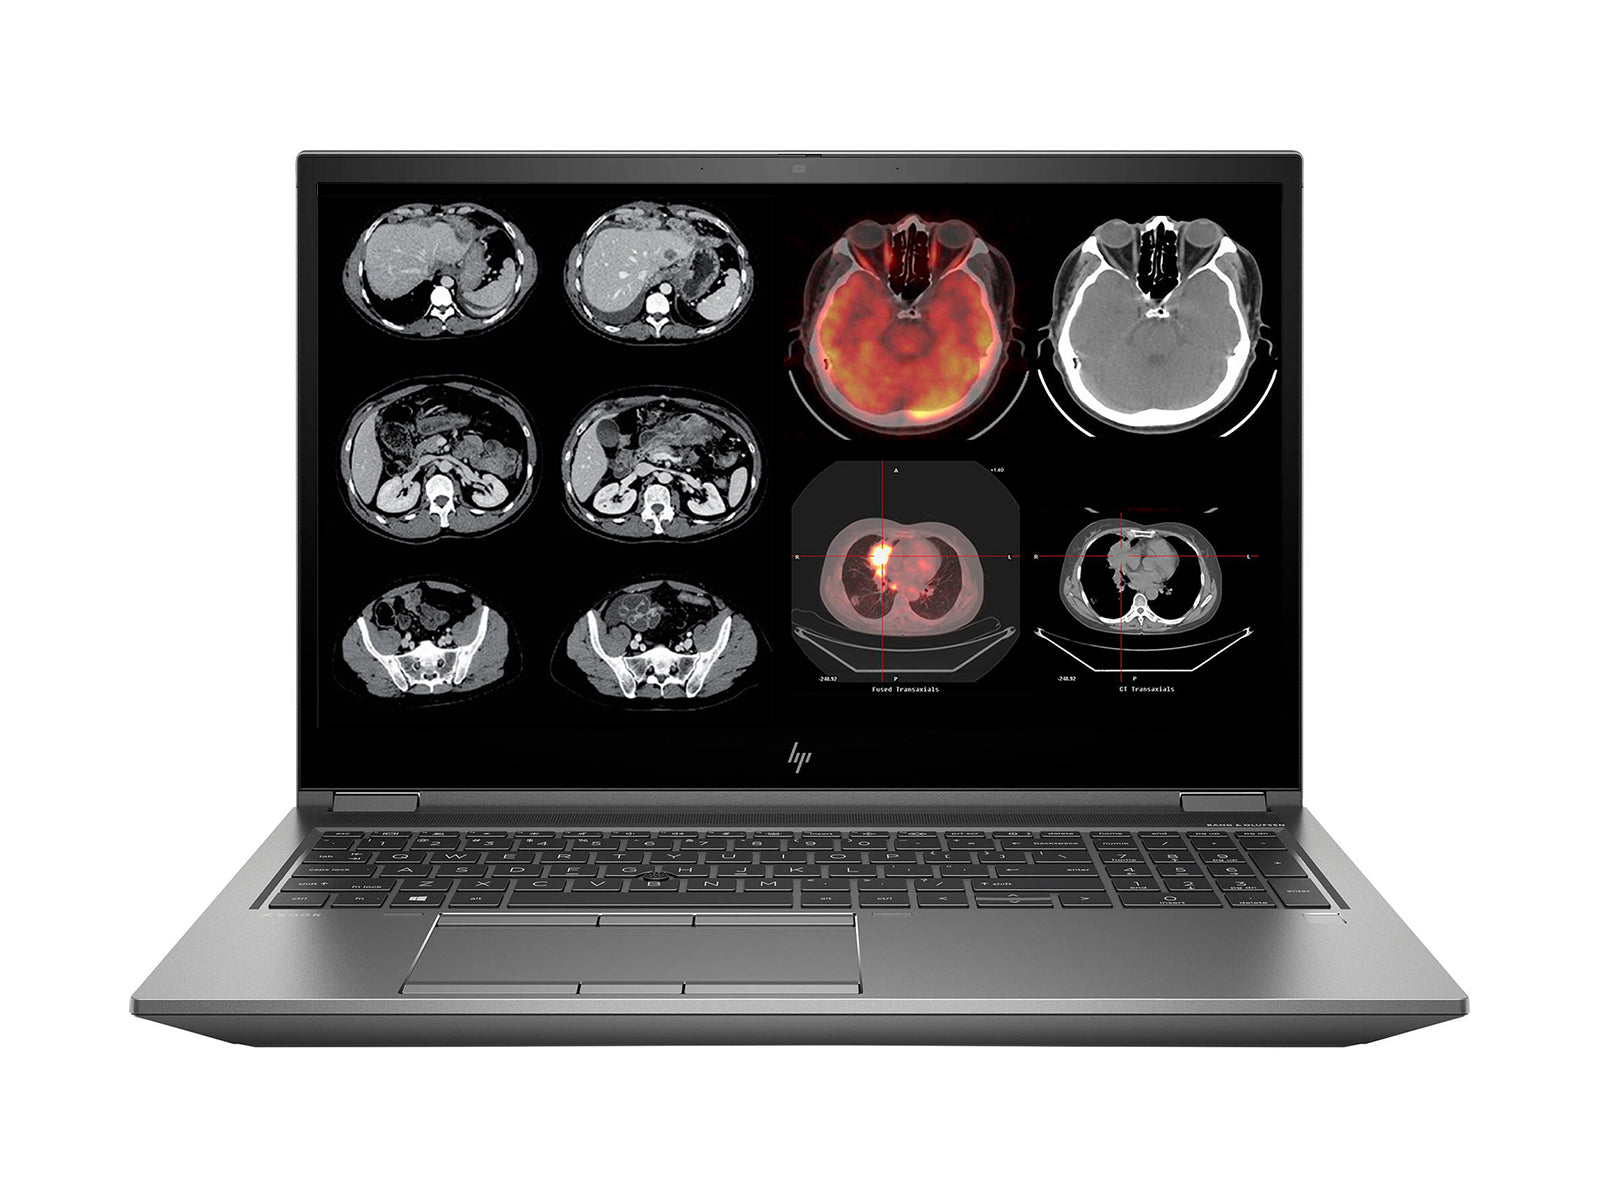 HP ZBook 15 G7 Mobile Radiology Workstation | 15.6" Full HD LED | Core i9-10885H @ 5.30GHz | 8-Core | 64GB DDR4 | 512GB NVMe SSD | Quadro RTX 3000 6GB | Win10 Pro Monitors.com 